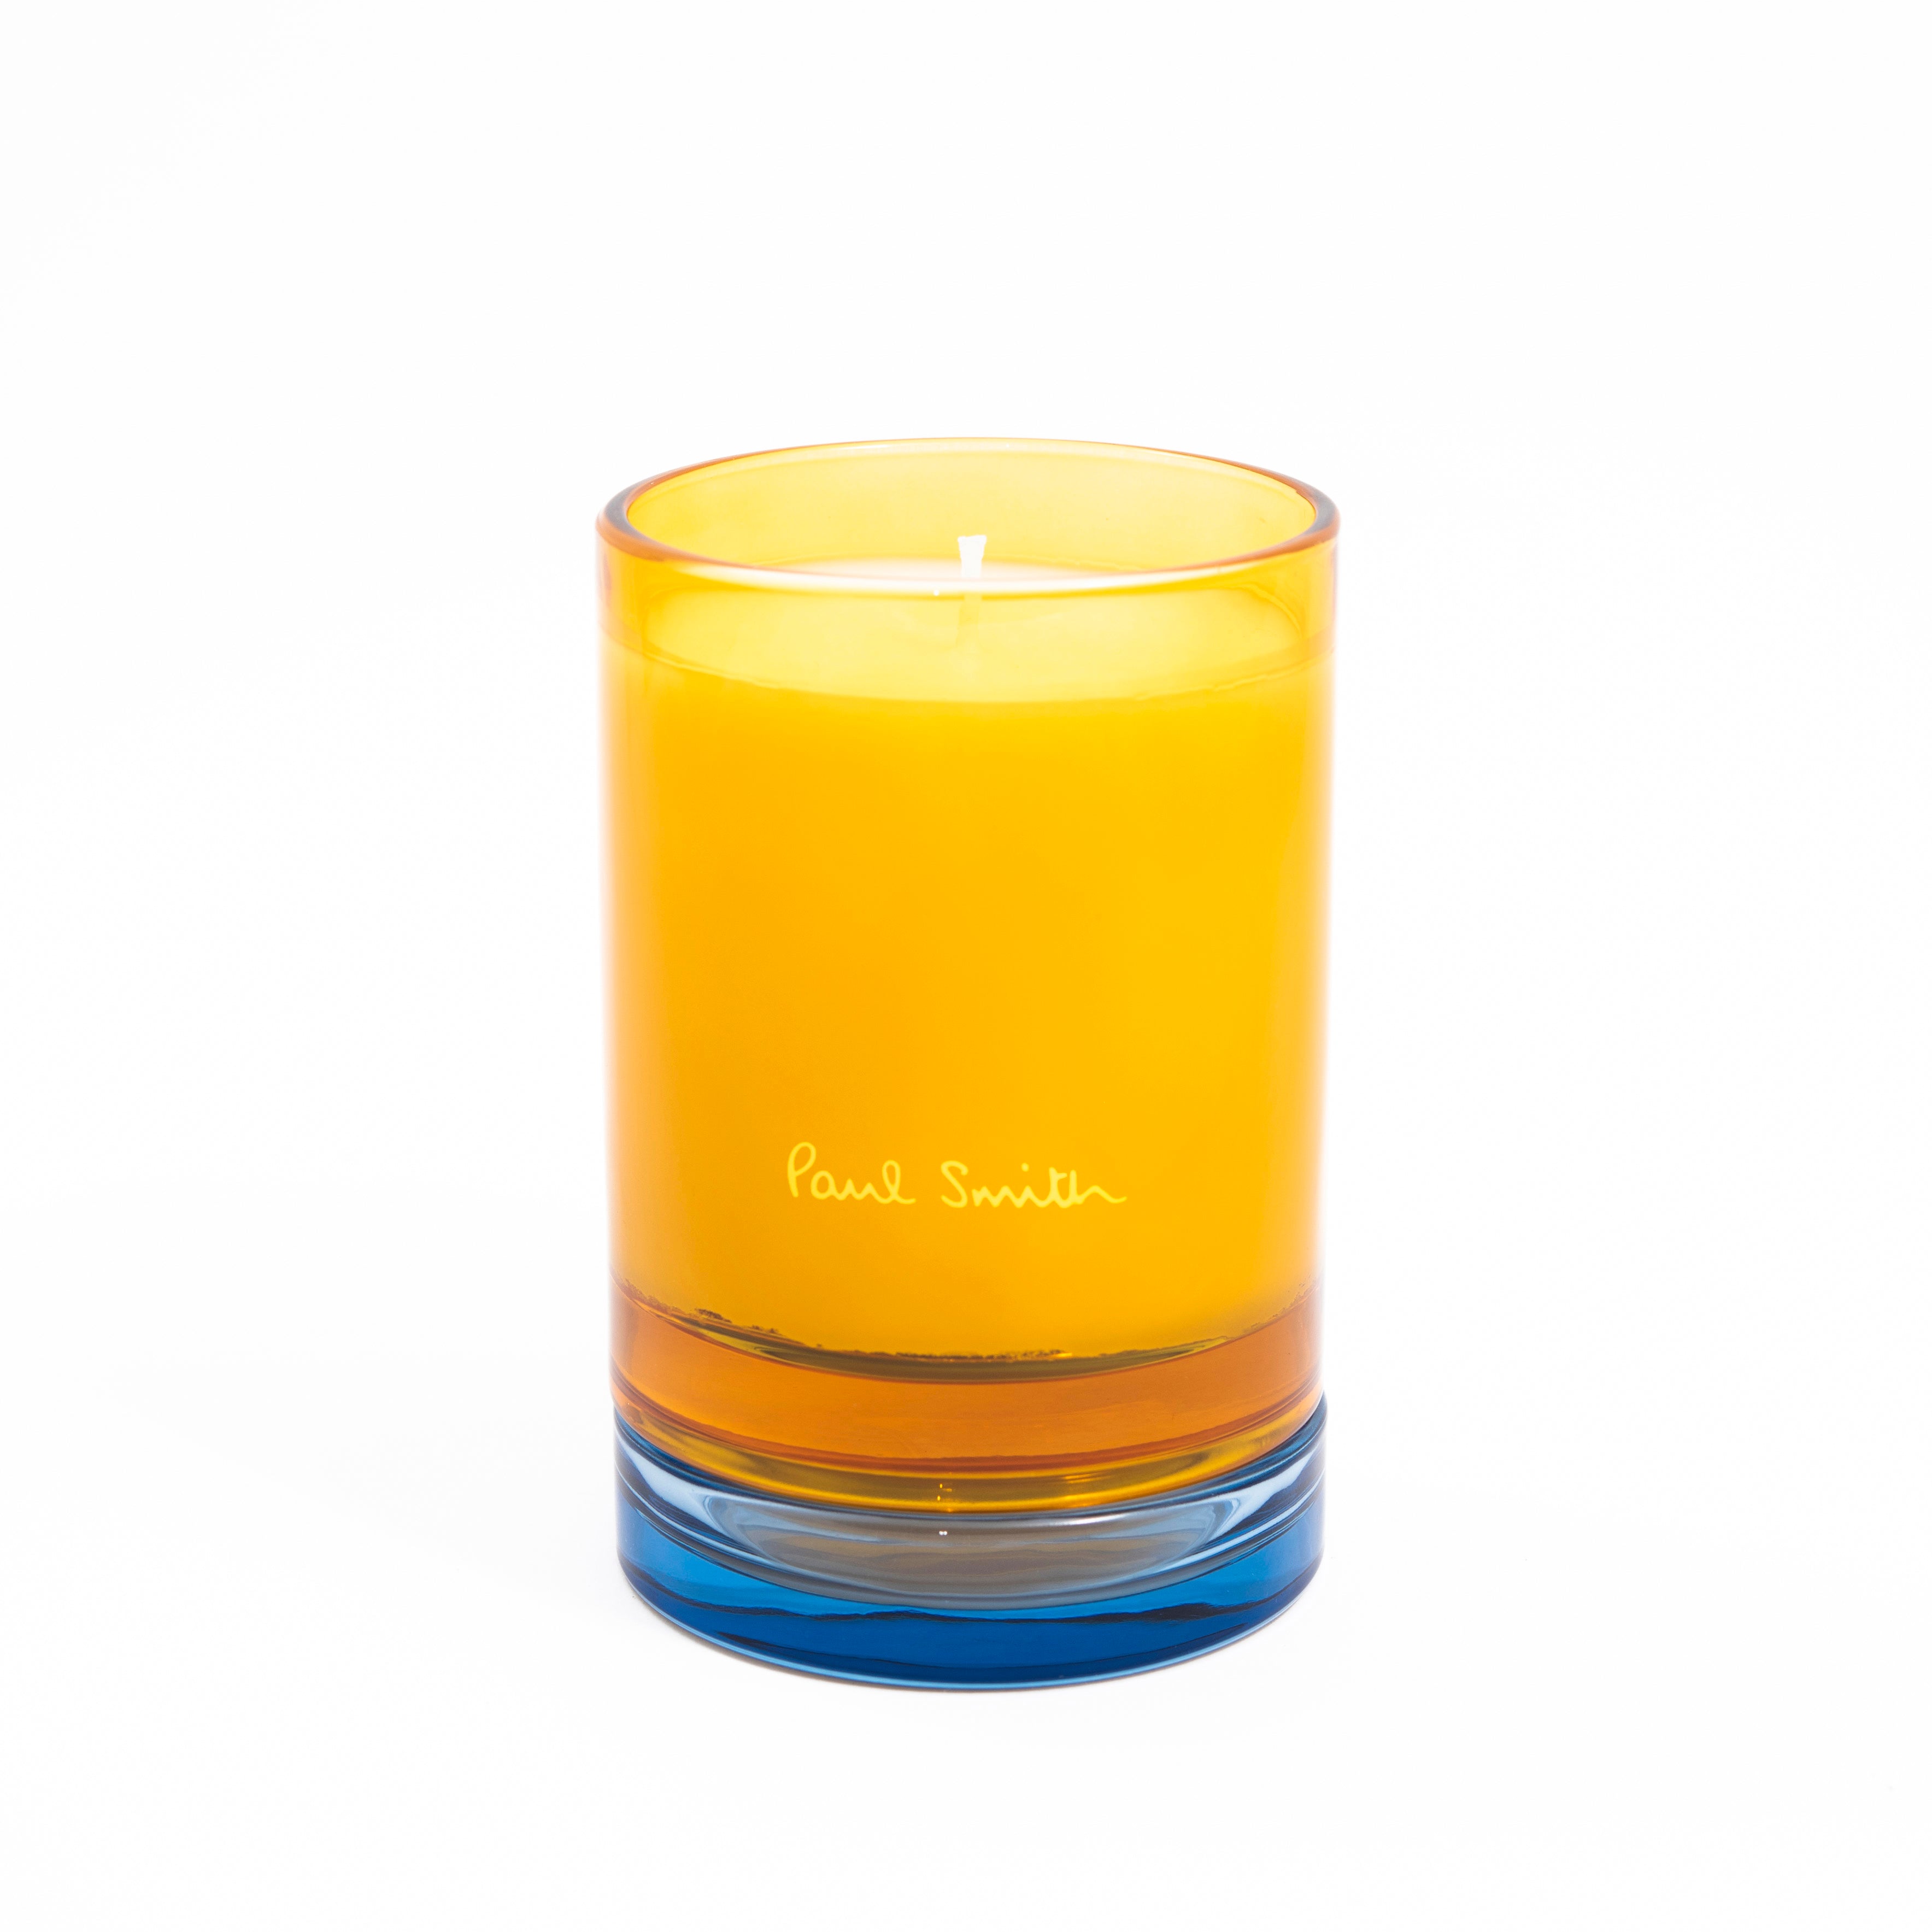 Paul Smith Daydreamer Candle 240g